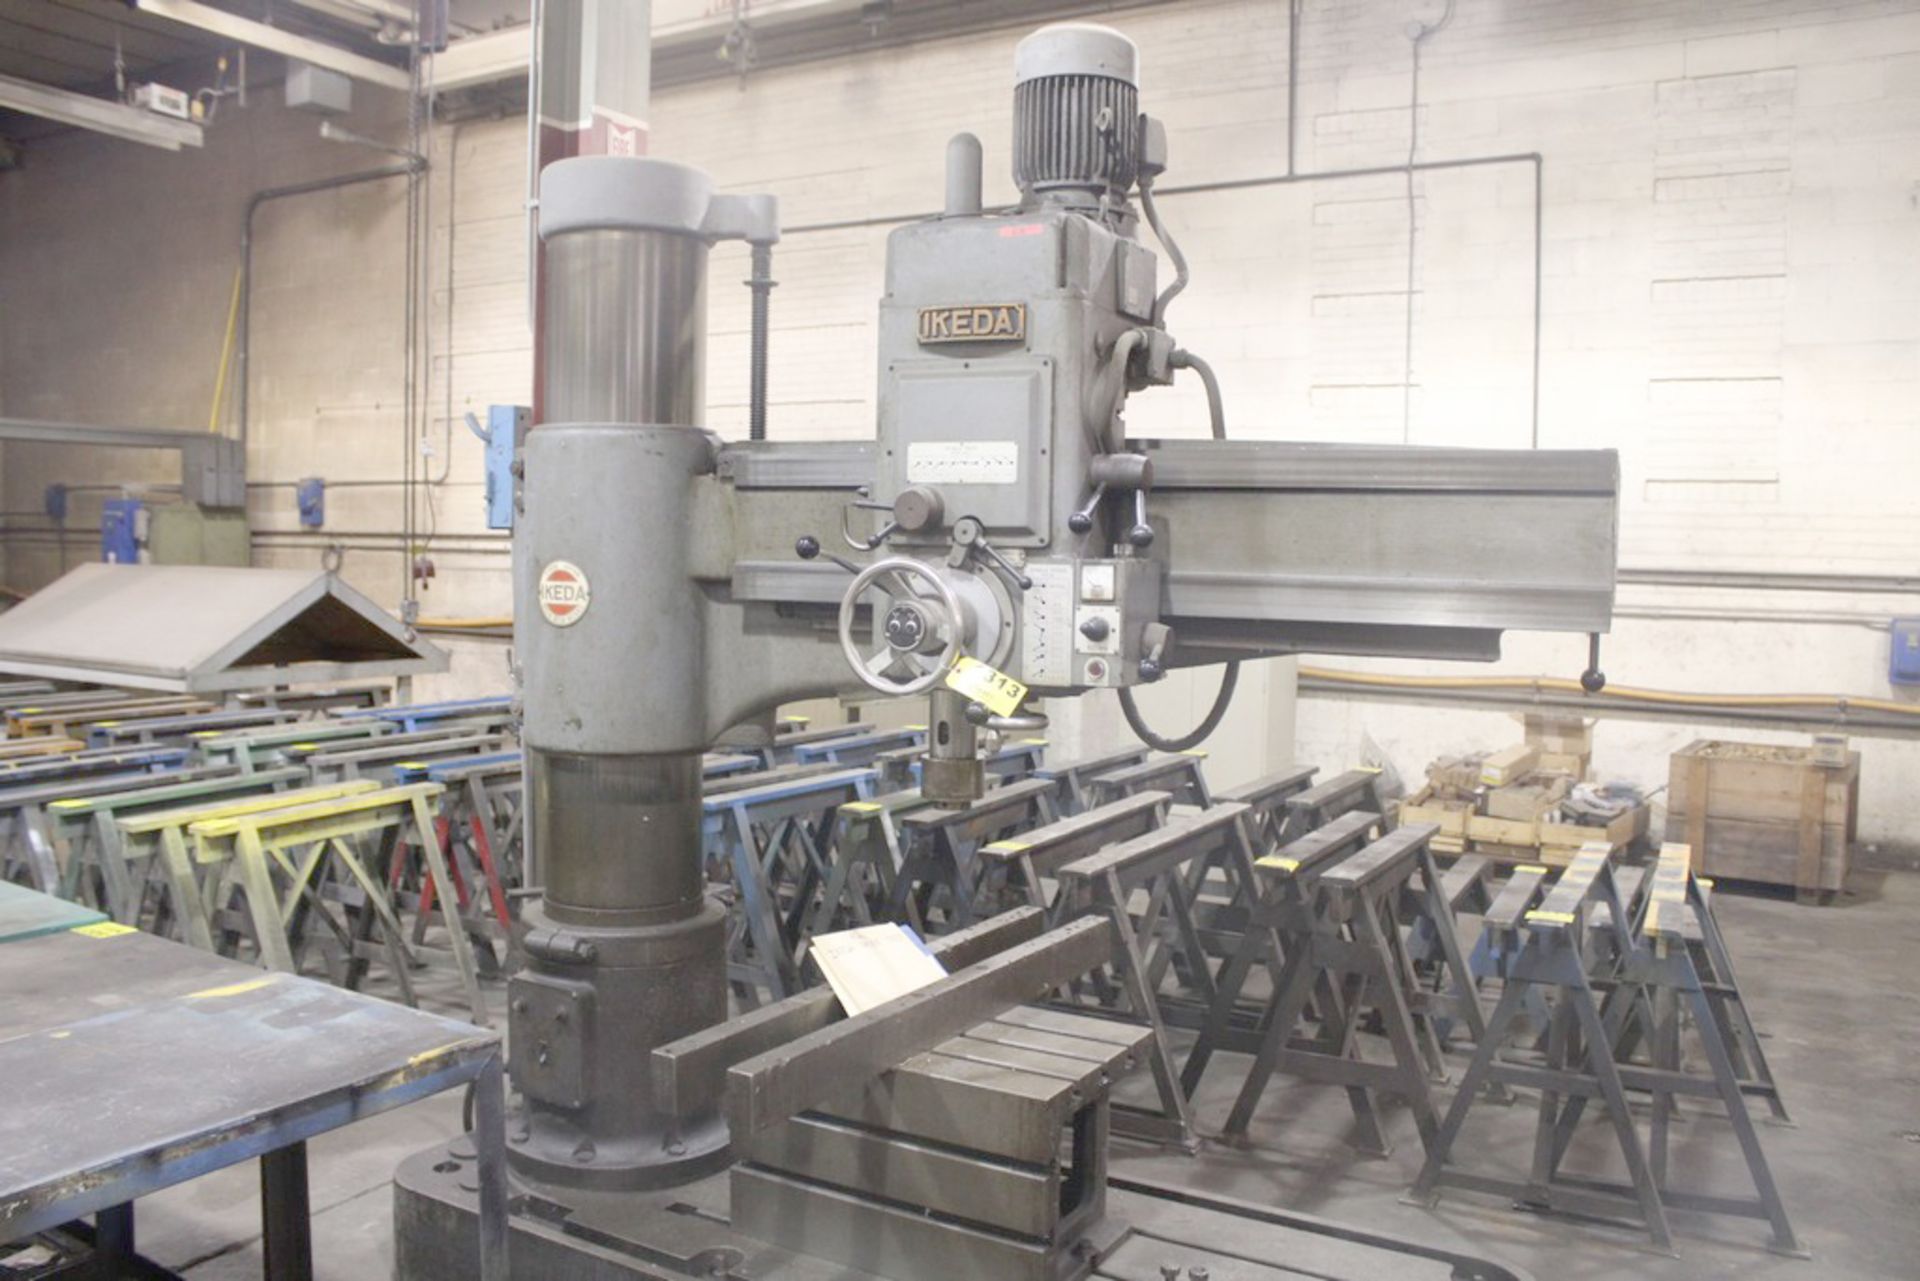 IKEDA 68” ARM 13” COLUMN MODEL RM-1575 RADIAL DRILL, S/N 77259, 1500 RPM SPINDLE, BOX TABLE